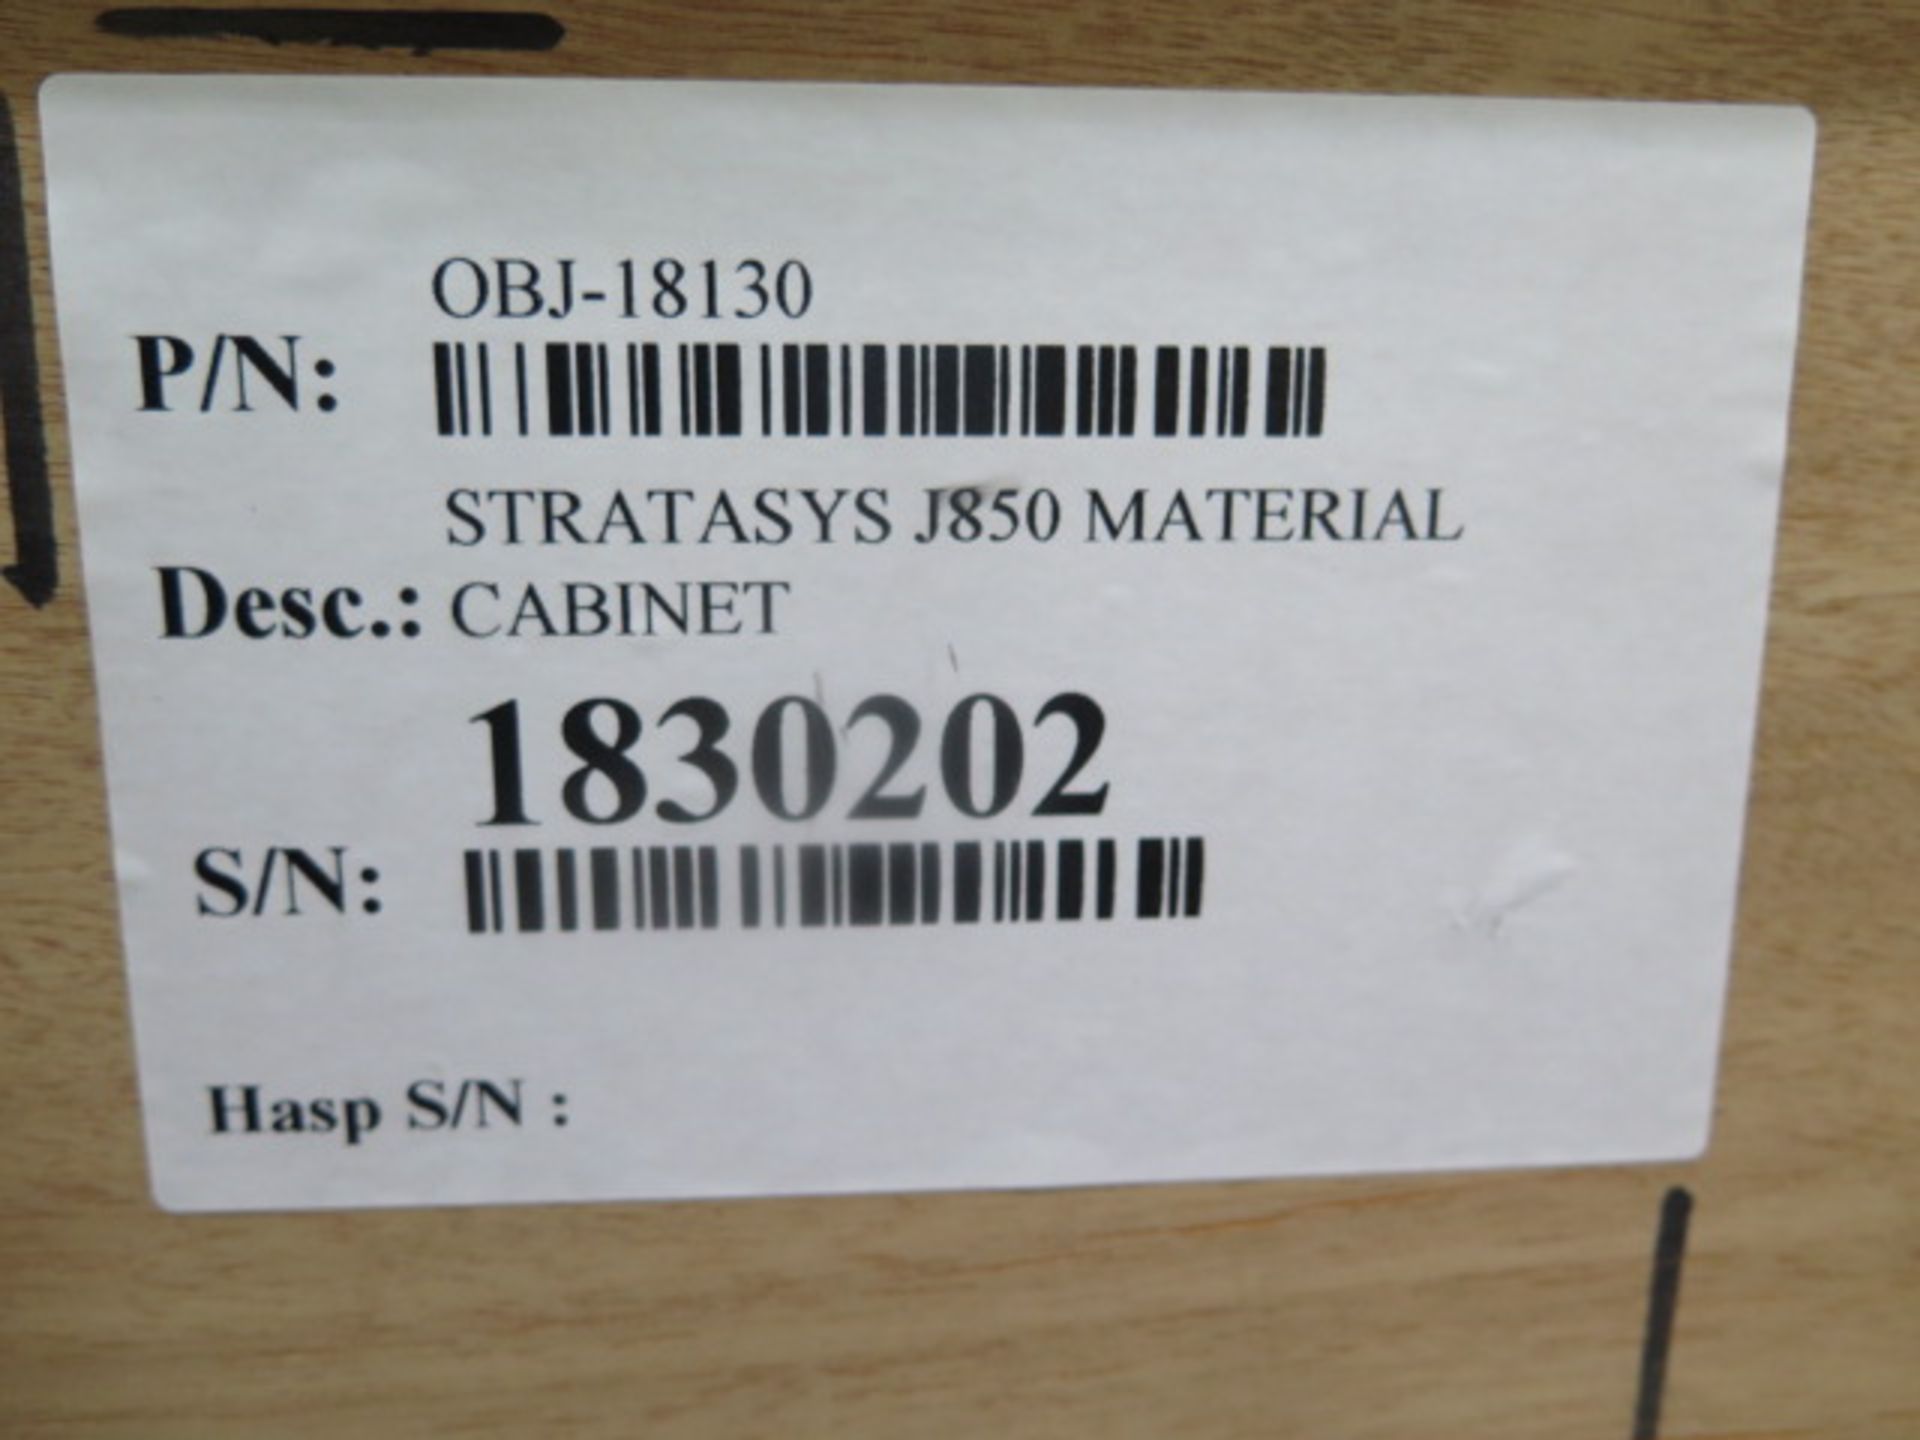 Stratasys OBJ18130 Duplex Material Cabinet s/n 183202 (NEW IN CRATE For J850 3D Printers) SOLD AS IS - Image 7 of 9